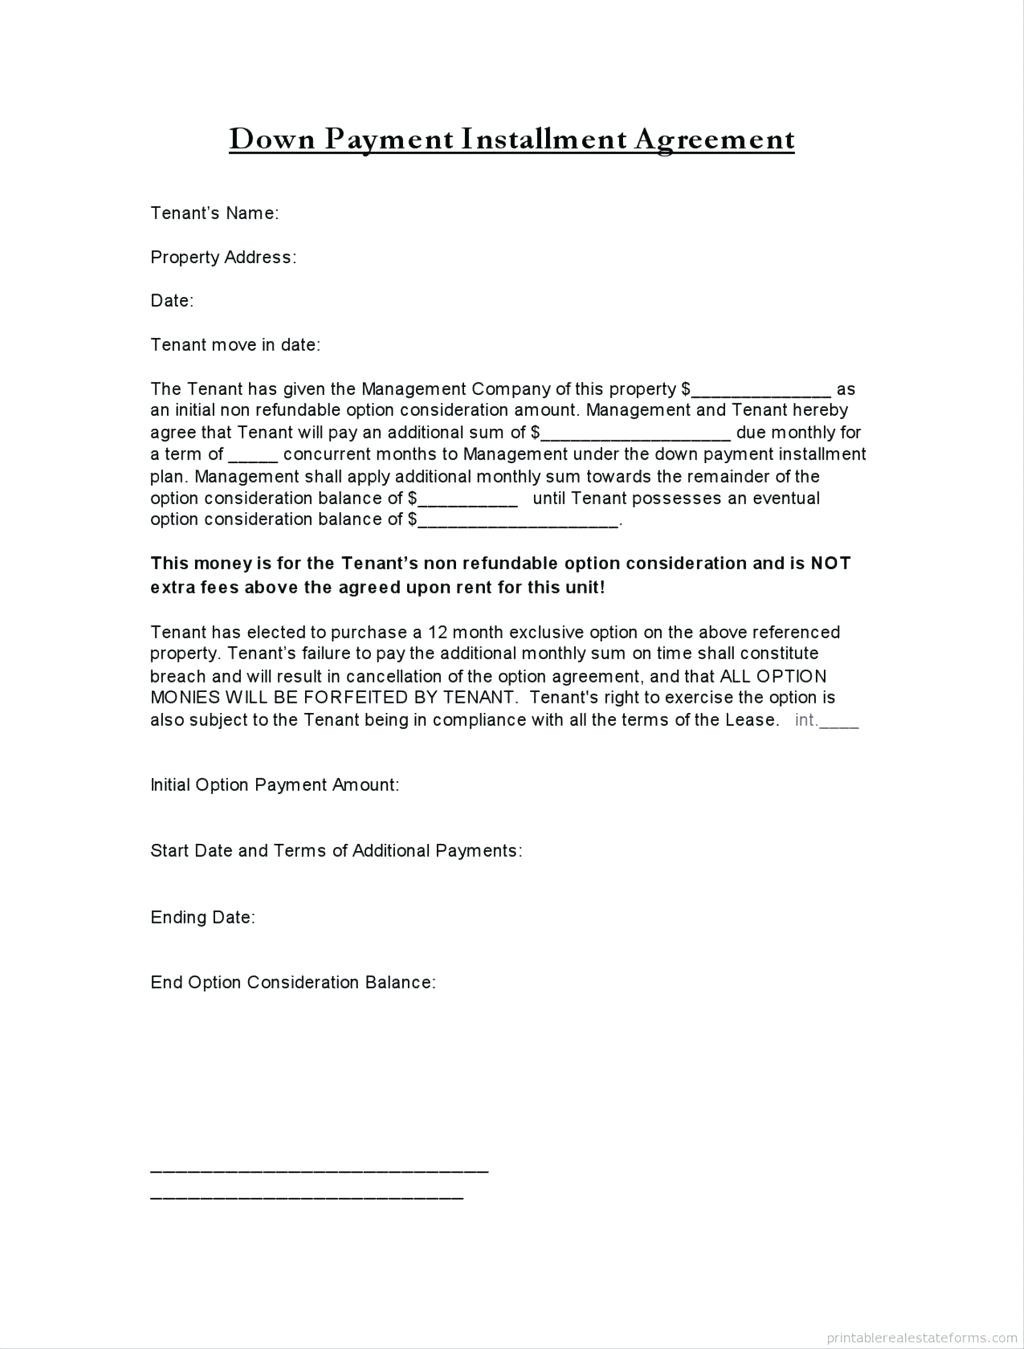 Cp2000 Response Letter Template - Cp2000 Response Letter Sample Unique Cp2000 Response Letter Sample